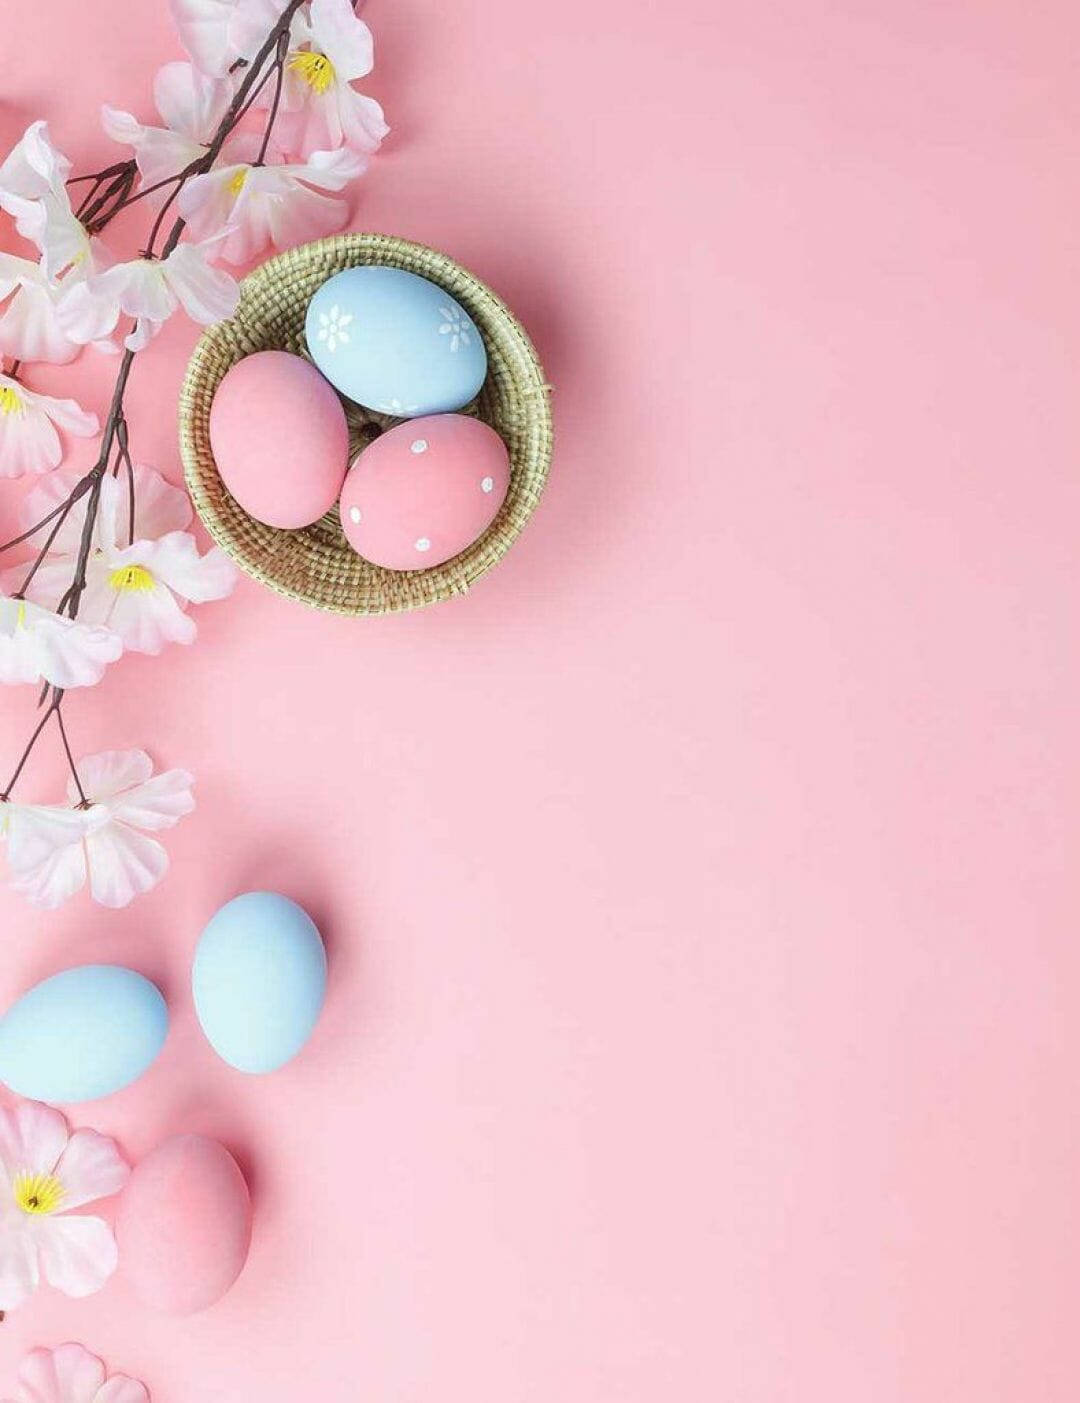 Easter Eggs On Pink Background With Cherry Blossoms